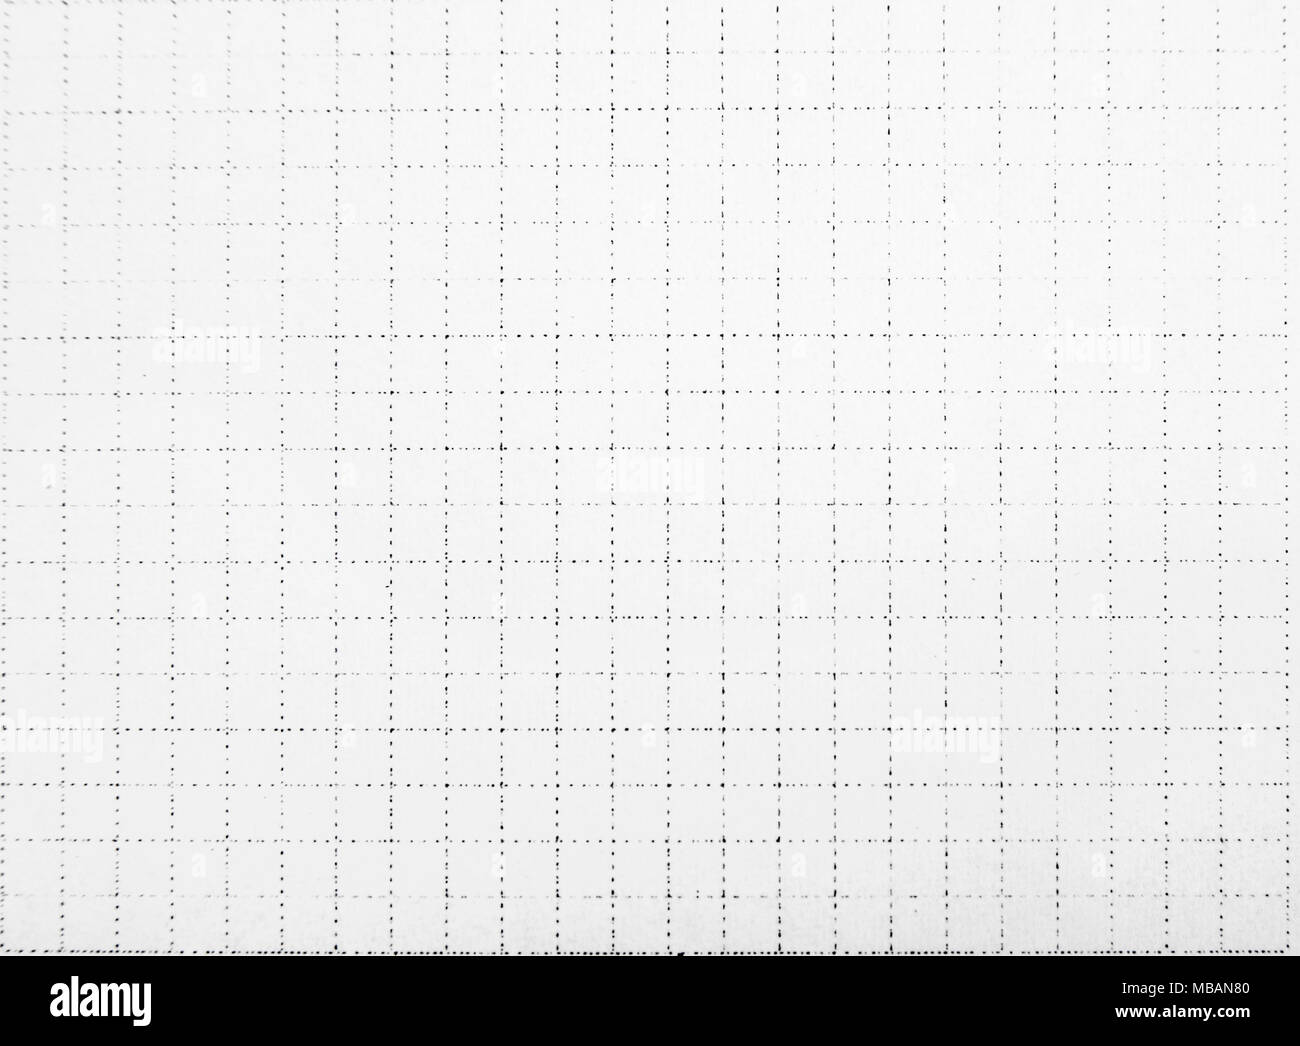 Graph Paper Notebook: 10 Squares Per Inch (Large, 110 Pages, Black and White Soft Cover)